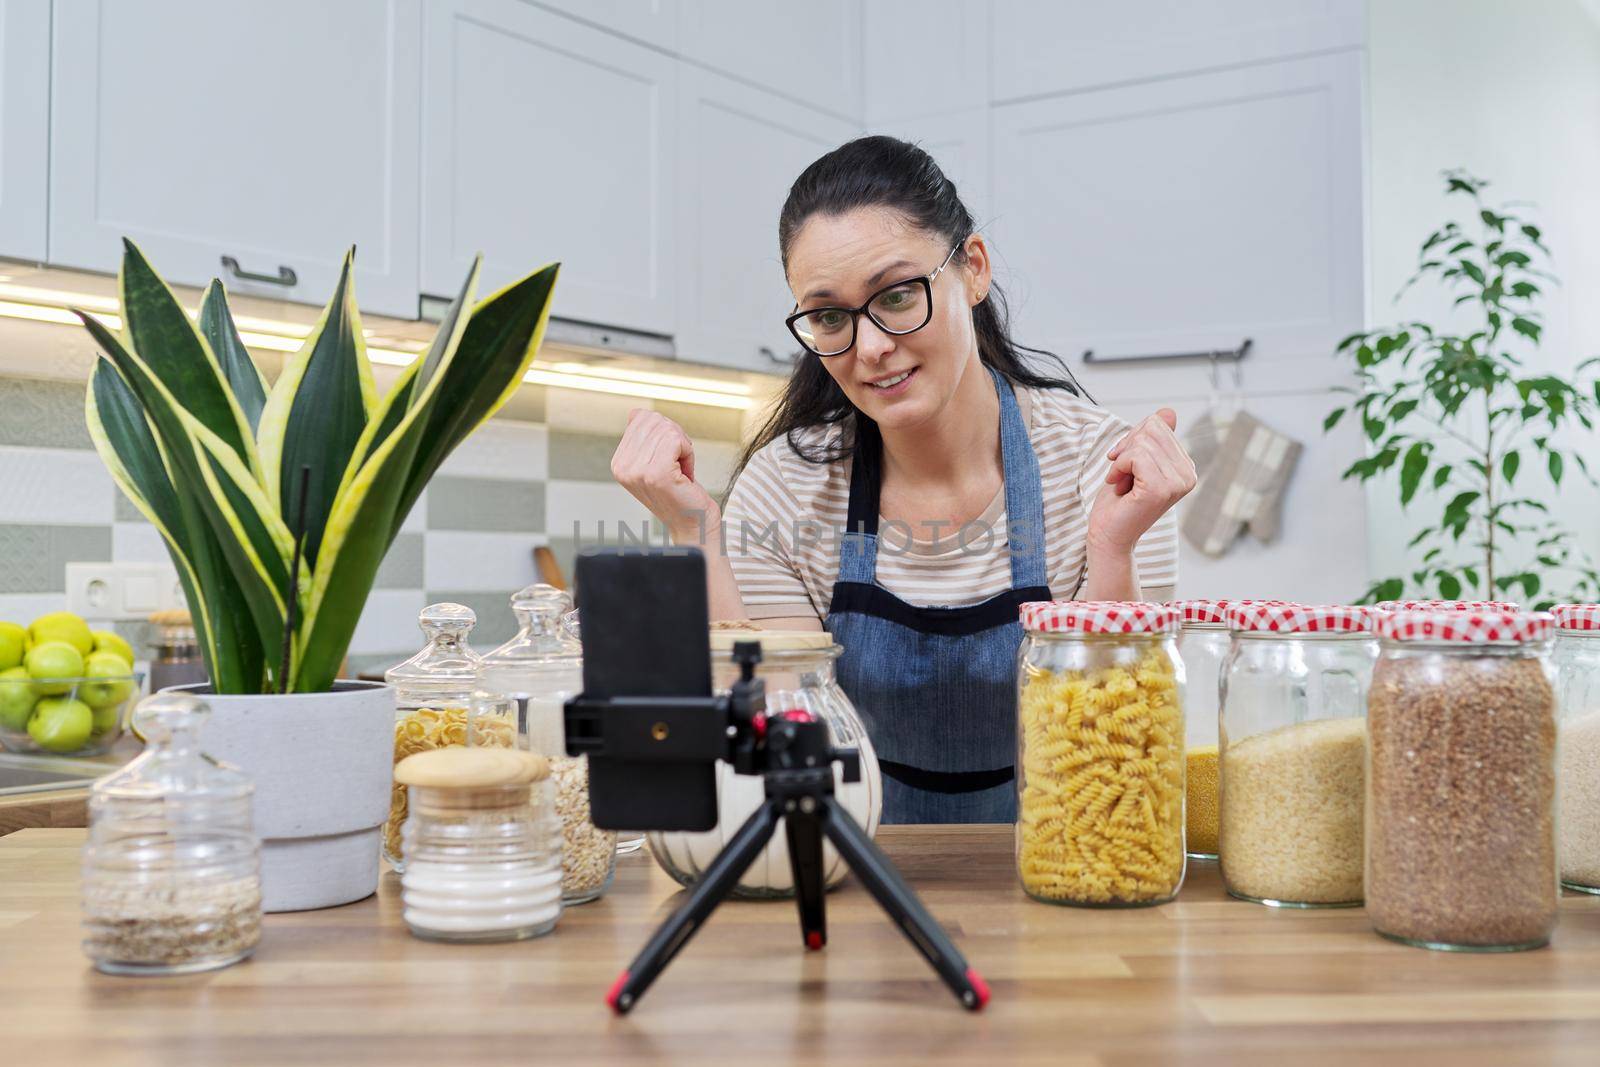 Online broadcast, blog about food, woman in an apron with jars of cereals noodles flour, looking at smartphone camera, telling and showing about food storage, organizing kitchen